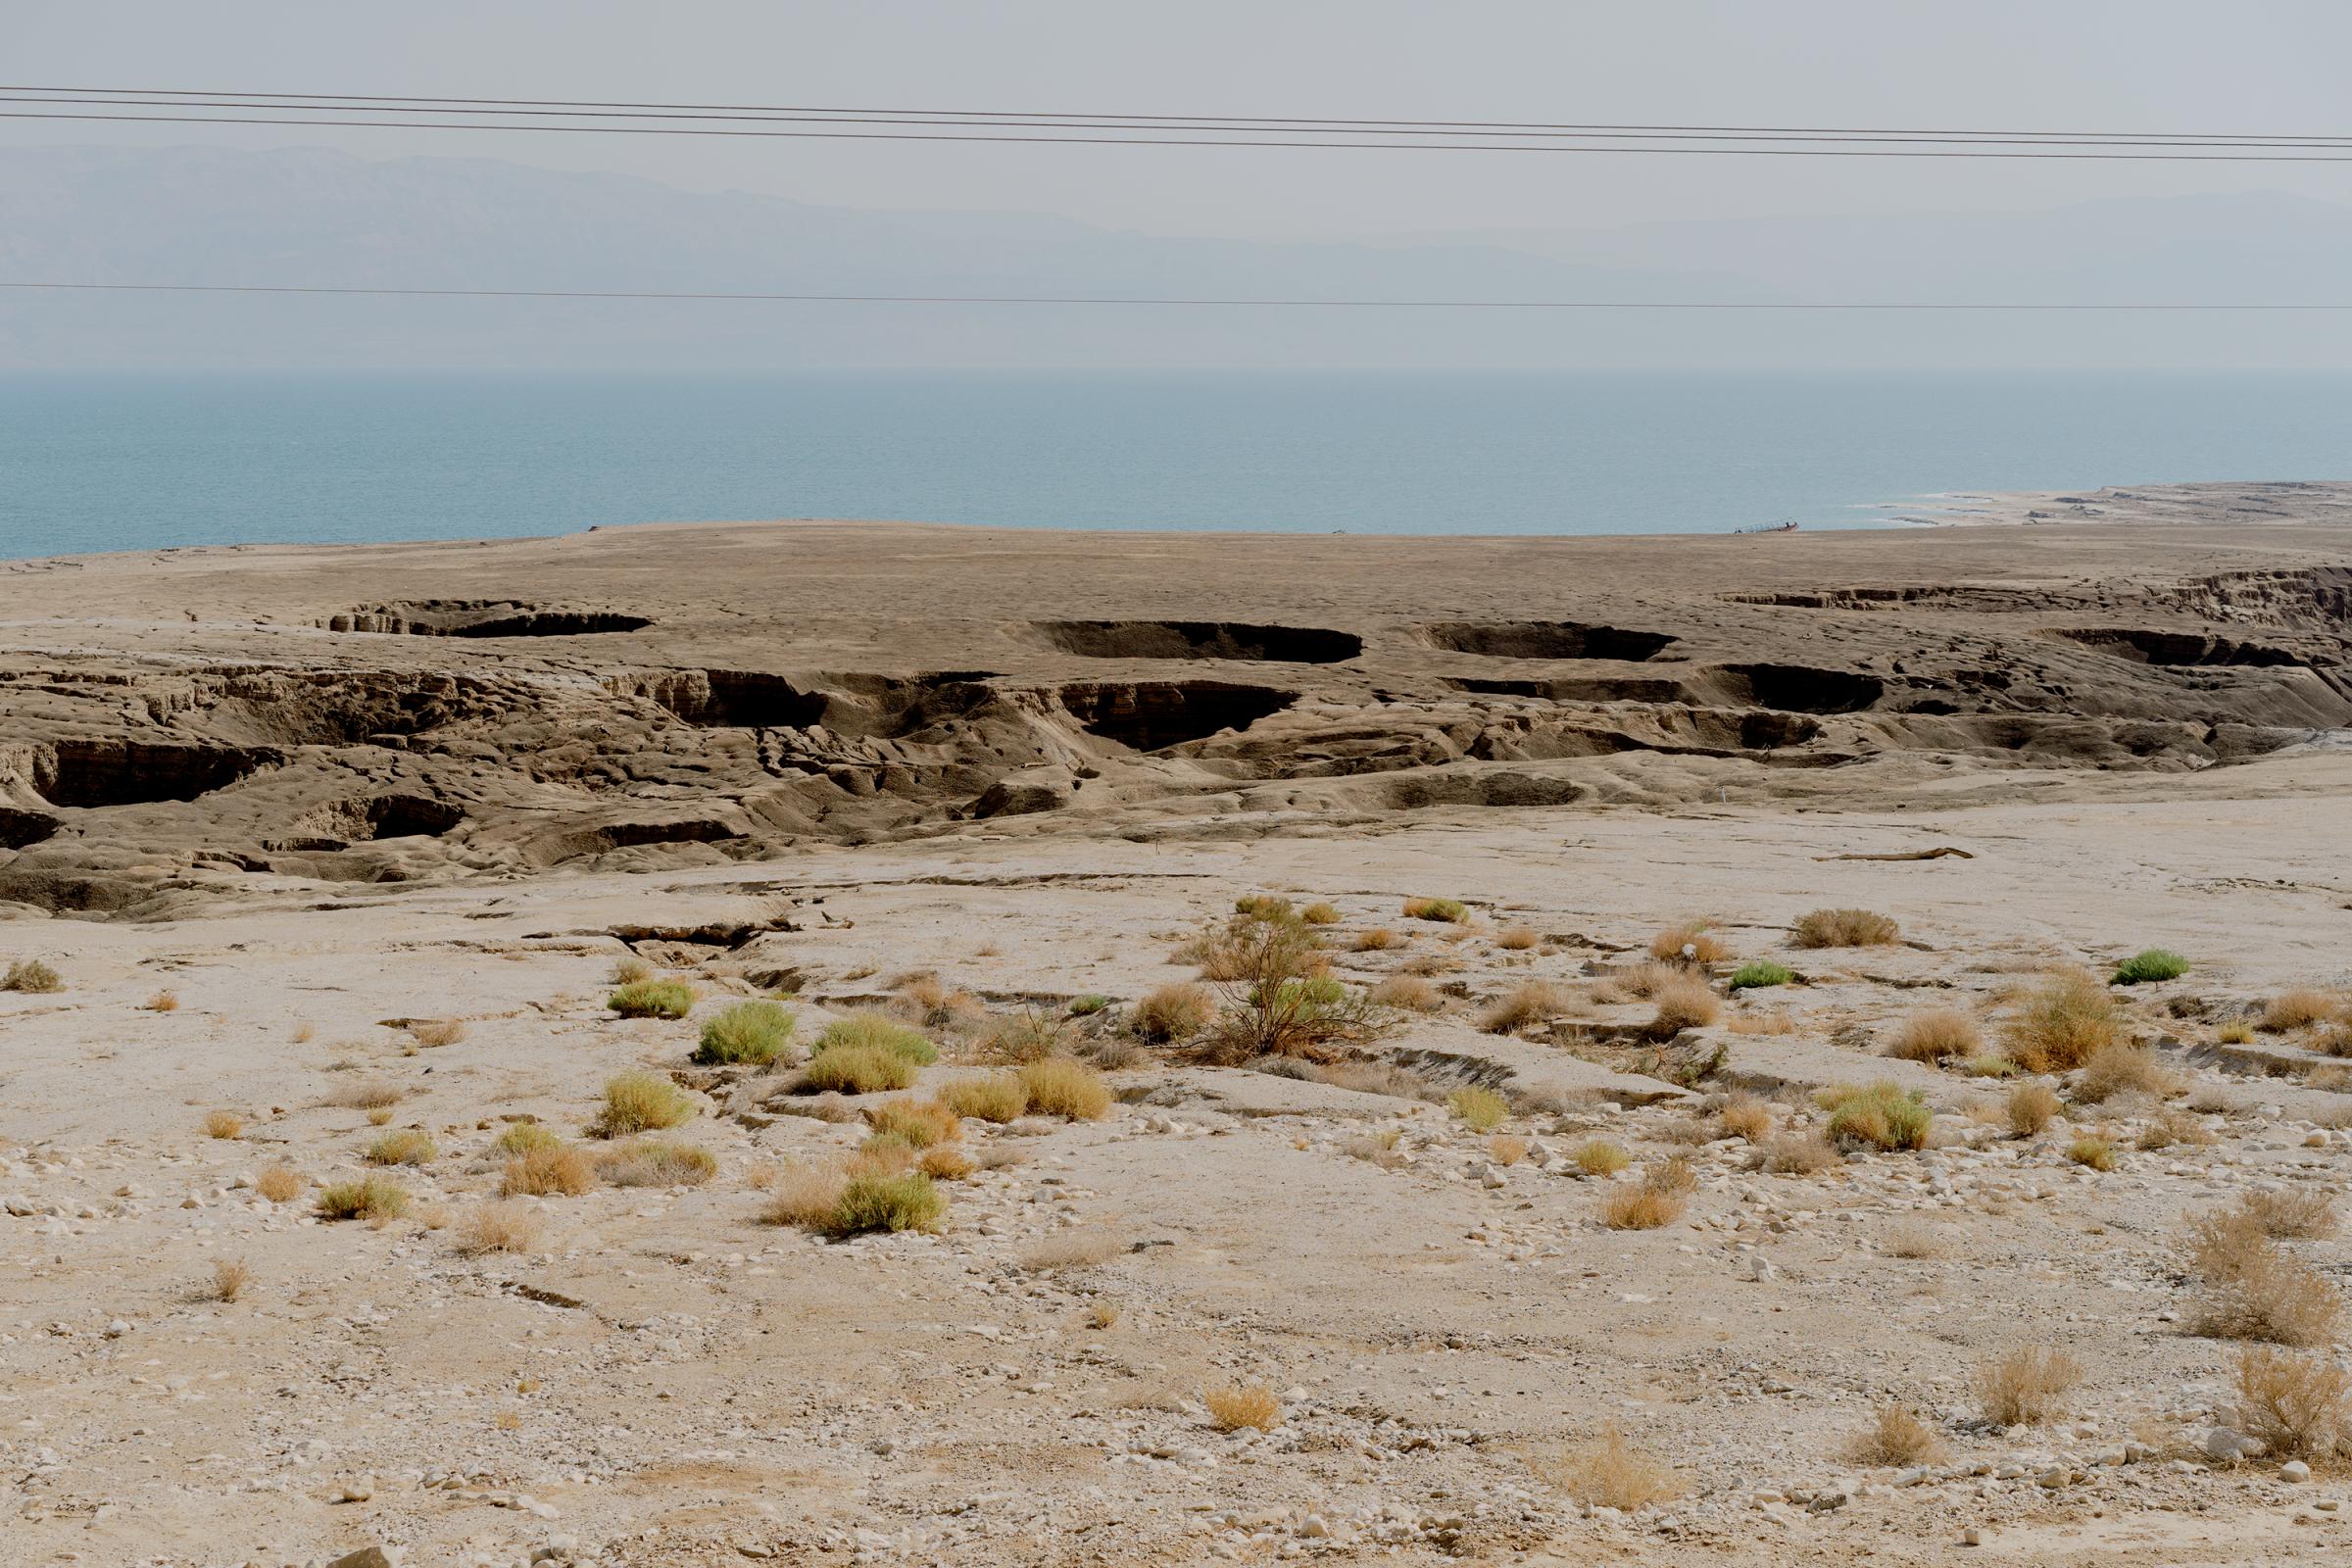 NPR - What is killing the Dead Sea? - Sinkholes near the western shores of the Dead Sea.